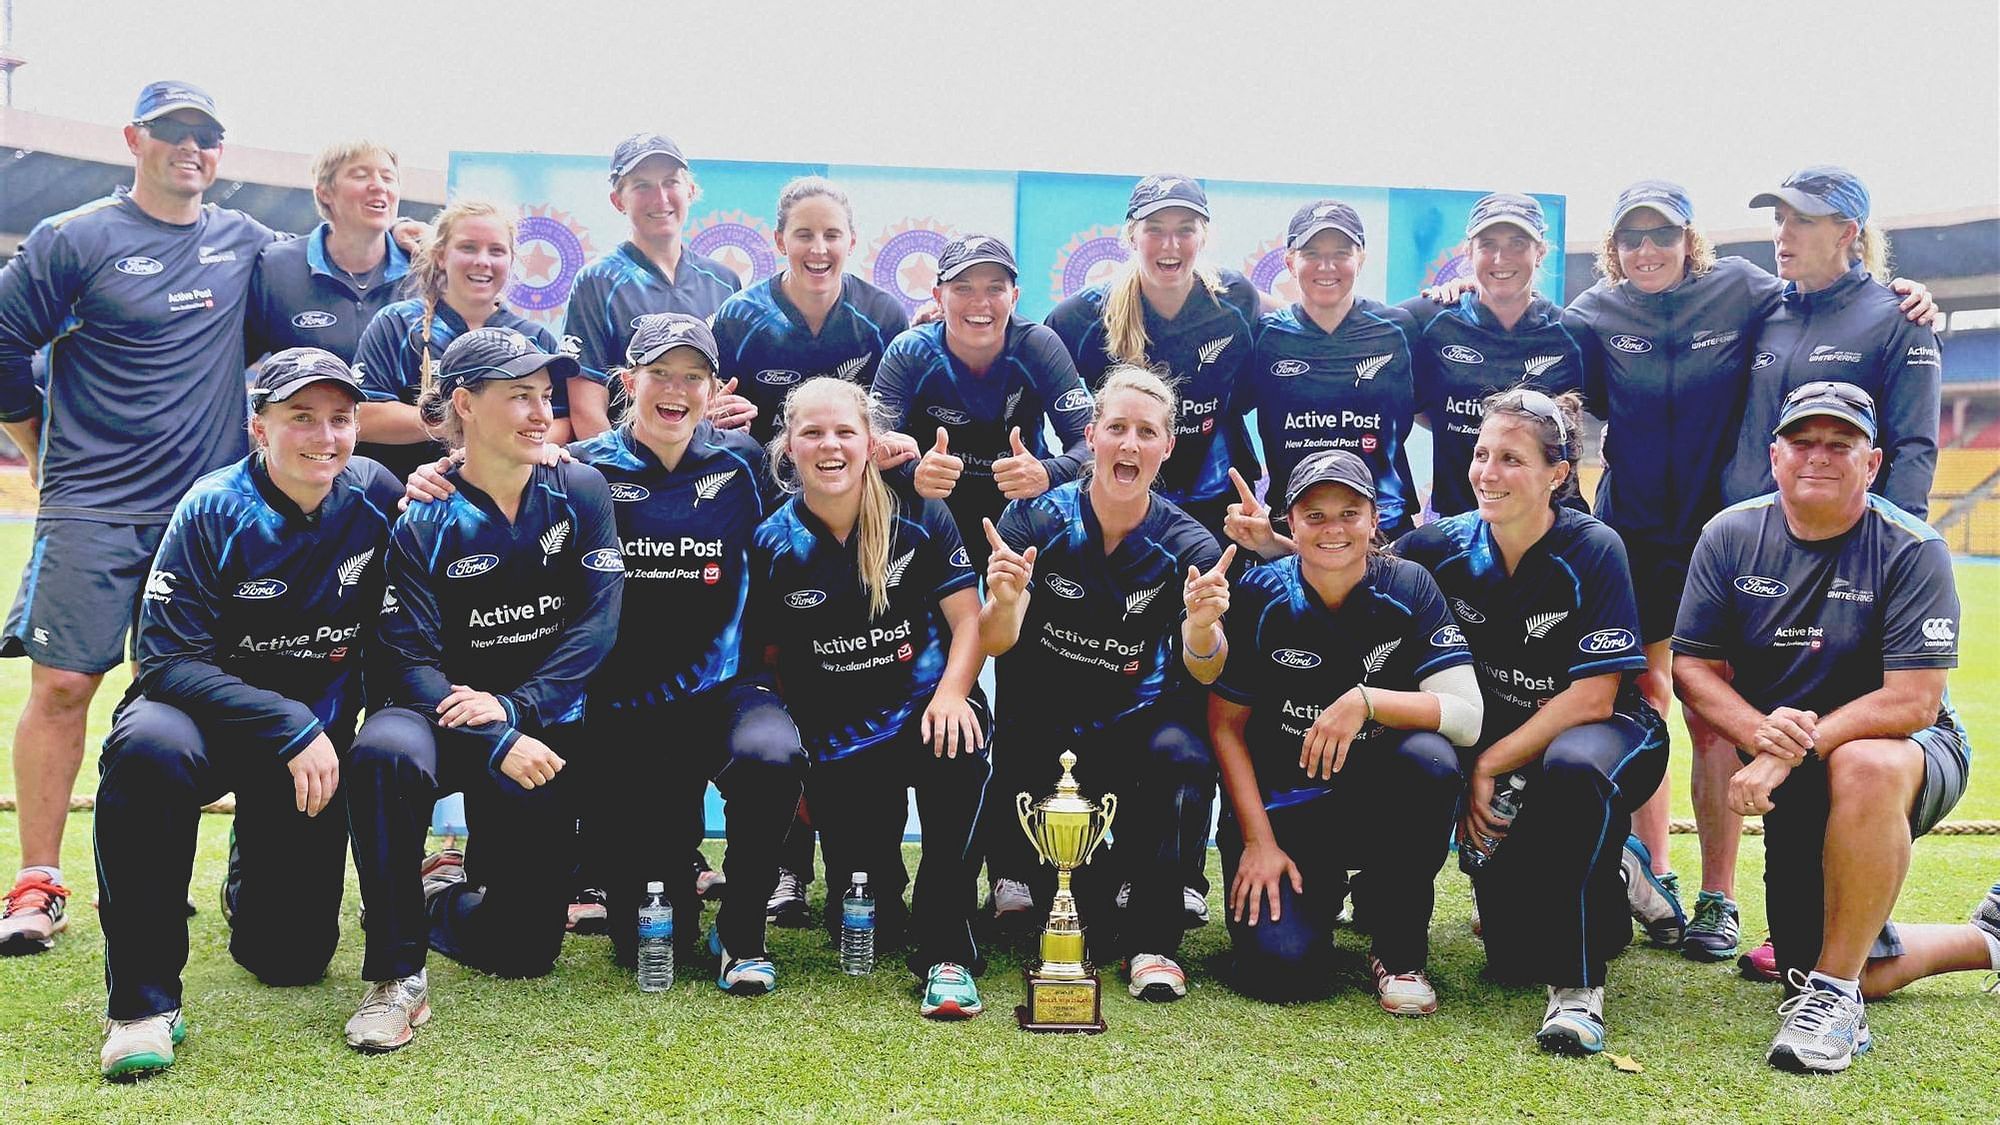 New Zealand’s women cricketers pose for a group photo with the T20 trophy after winning the series against India by 2-1 at Chinnaswamy stadium in Bengaluru.